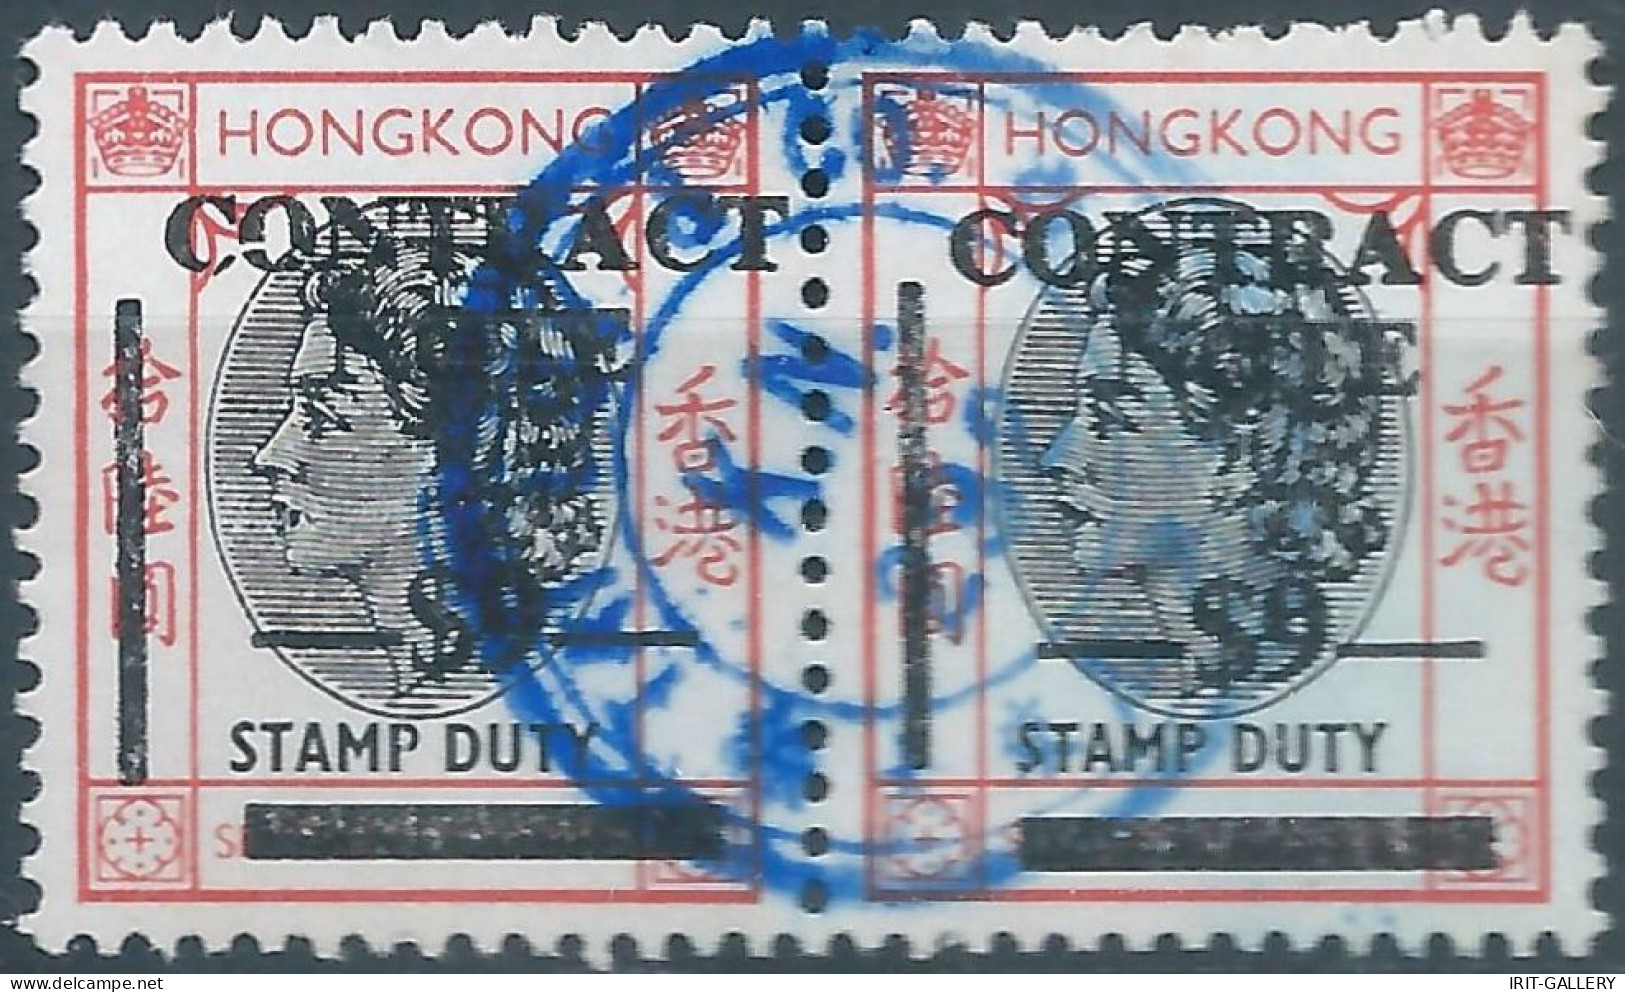 Great Britain-ENGLAND,HONG KONG Revenue Stamp DUTY Contract $9 In Pairs With The Central Cancelled - Sellos Fiscal-postal